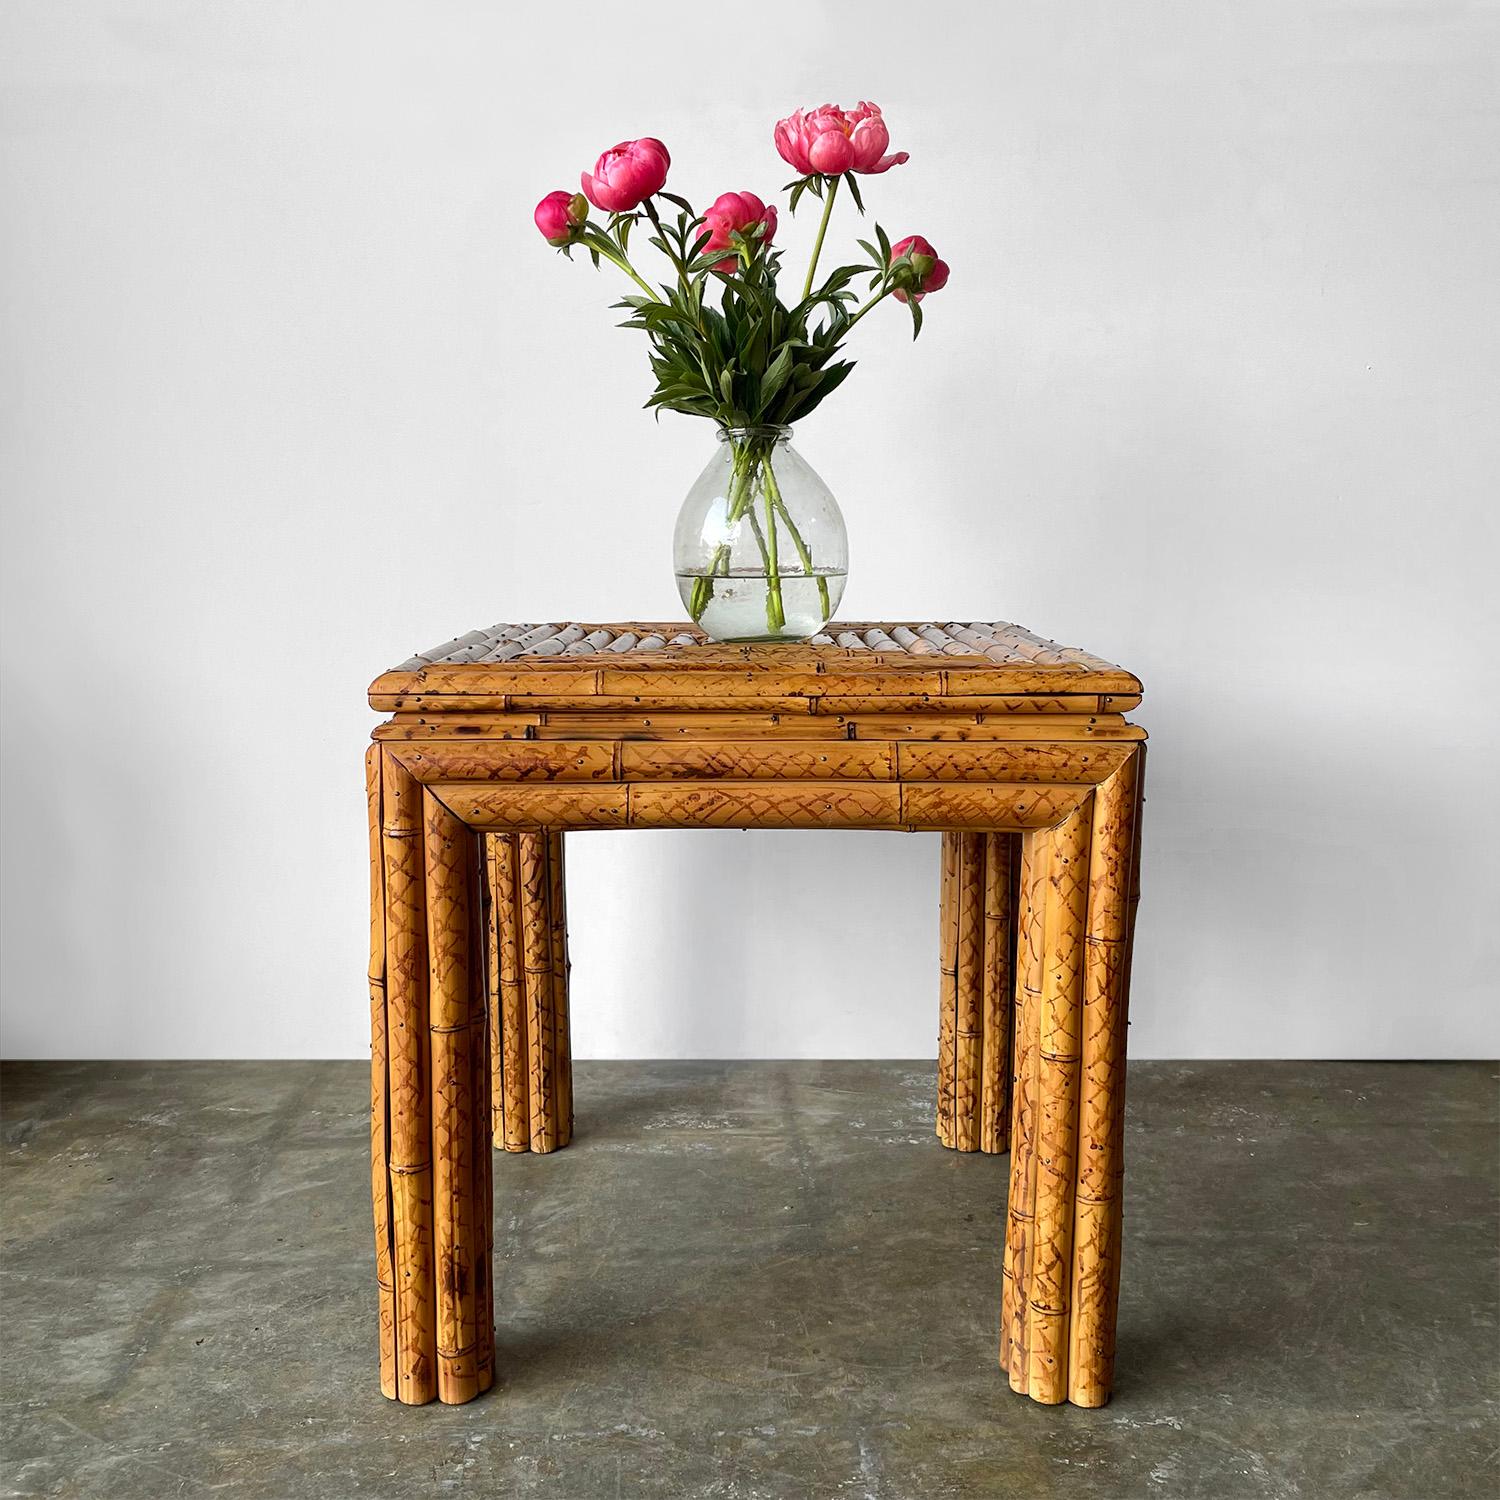 Split bamboo table
Circa 1970’s
Wonderful entry or statement piece
Handcrafted piece with great attention to detail
Table surface is comprised of centrifugal squares
Nailhead rivet details throughout
Patina from age and use